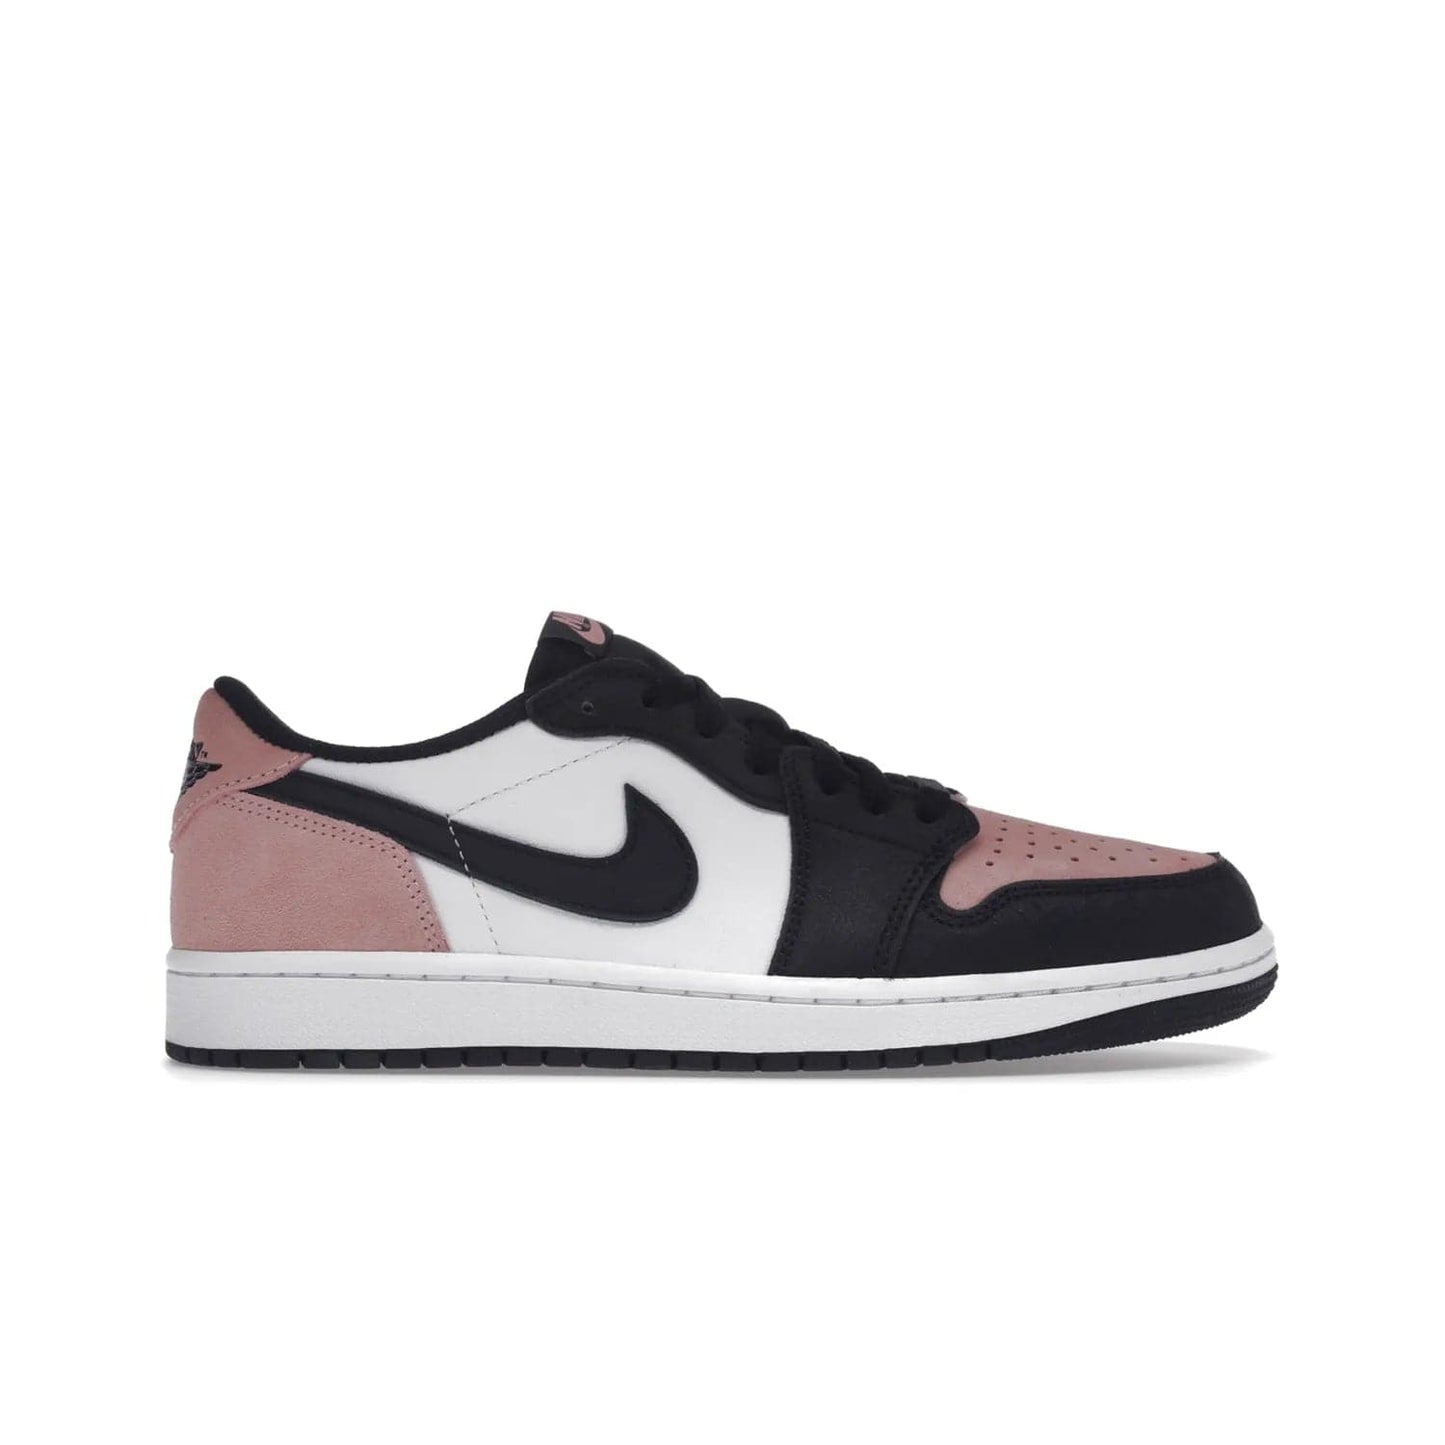 Jordan 1 Low OG Bleached Coral - Image 1 - Only at www.BallersClubKickz.com - Introducing the Air Jordan 1 Low OG Bleached Coral. Constructed with white leather, black cracked leather & Bleached Coral suede. Signature Jordan Wings logo, white Air sole. Get the pack in July 2022 and stand out.